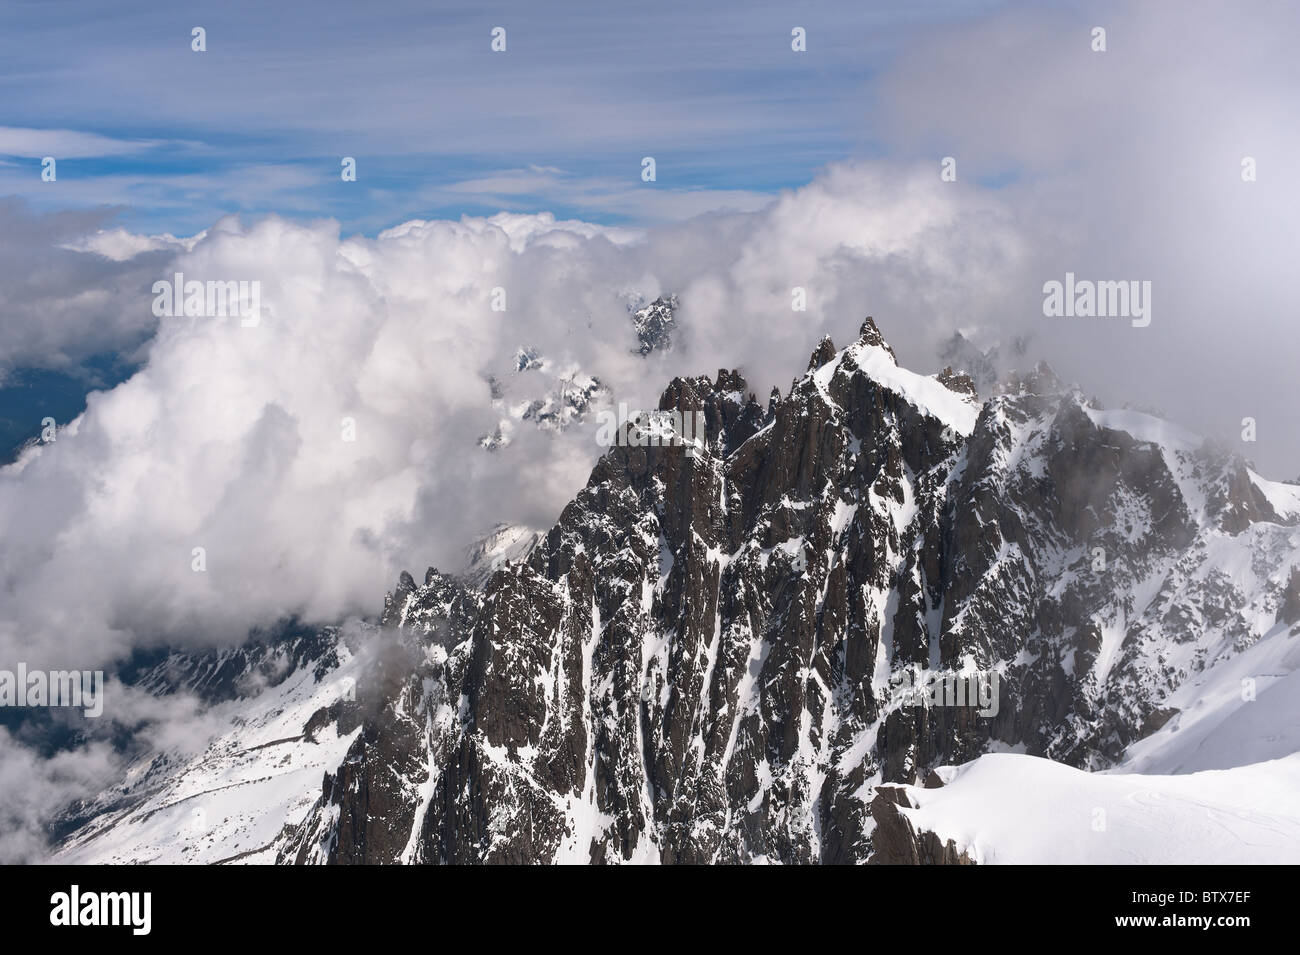 Cloudy mountain peaks in snow. French Alps over Chamonix. Popular skiing area. Stock Photo